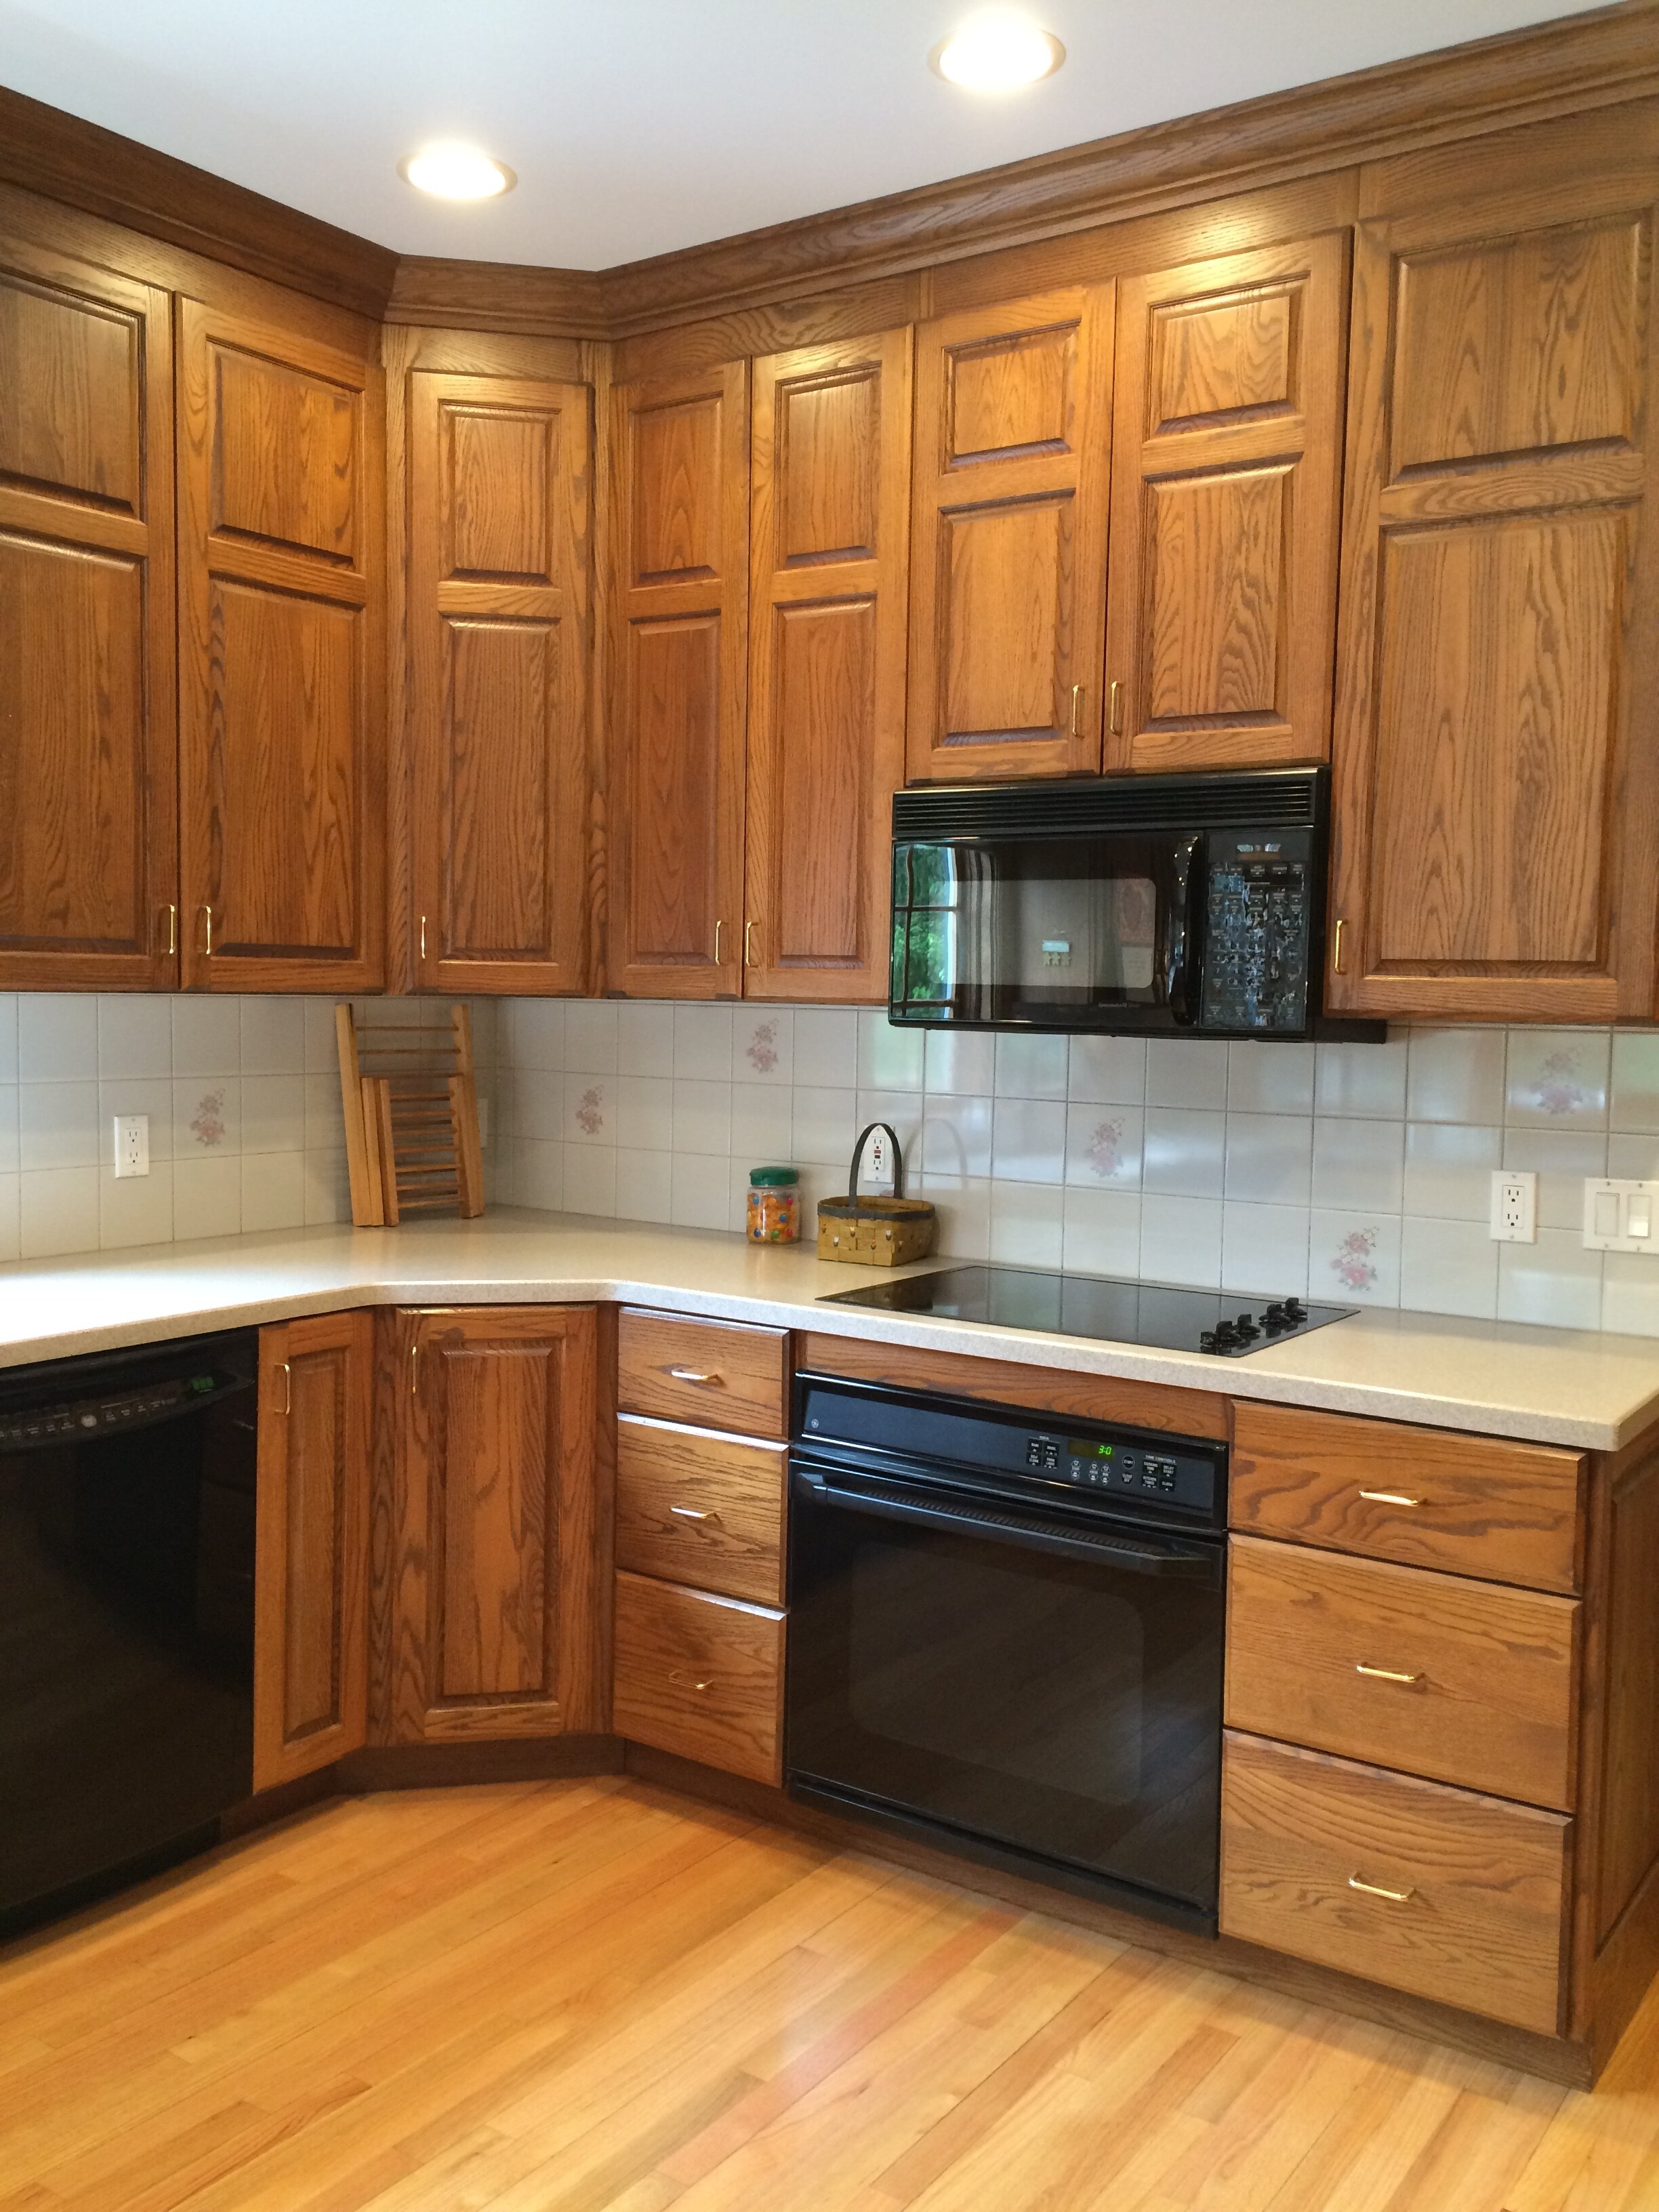 How To Make Natural Oak Kitchen Cabinets The Highlights Of Your Kitchen